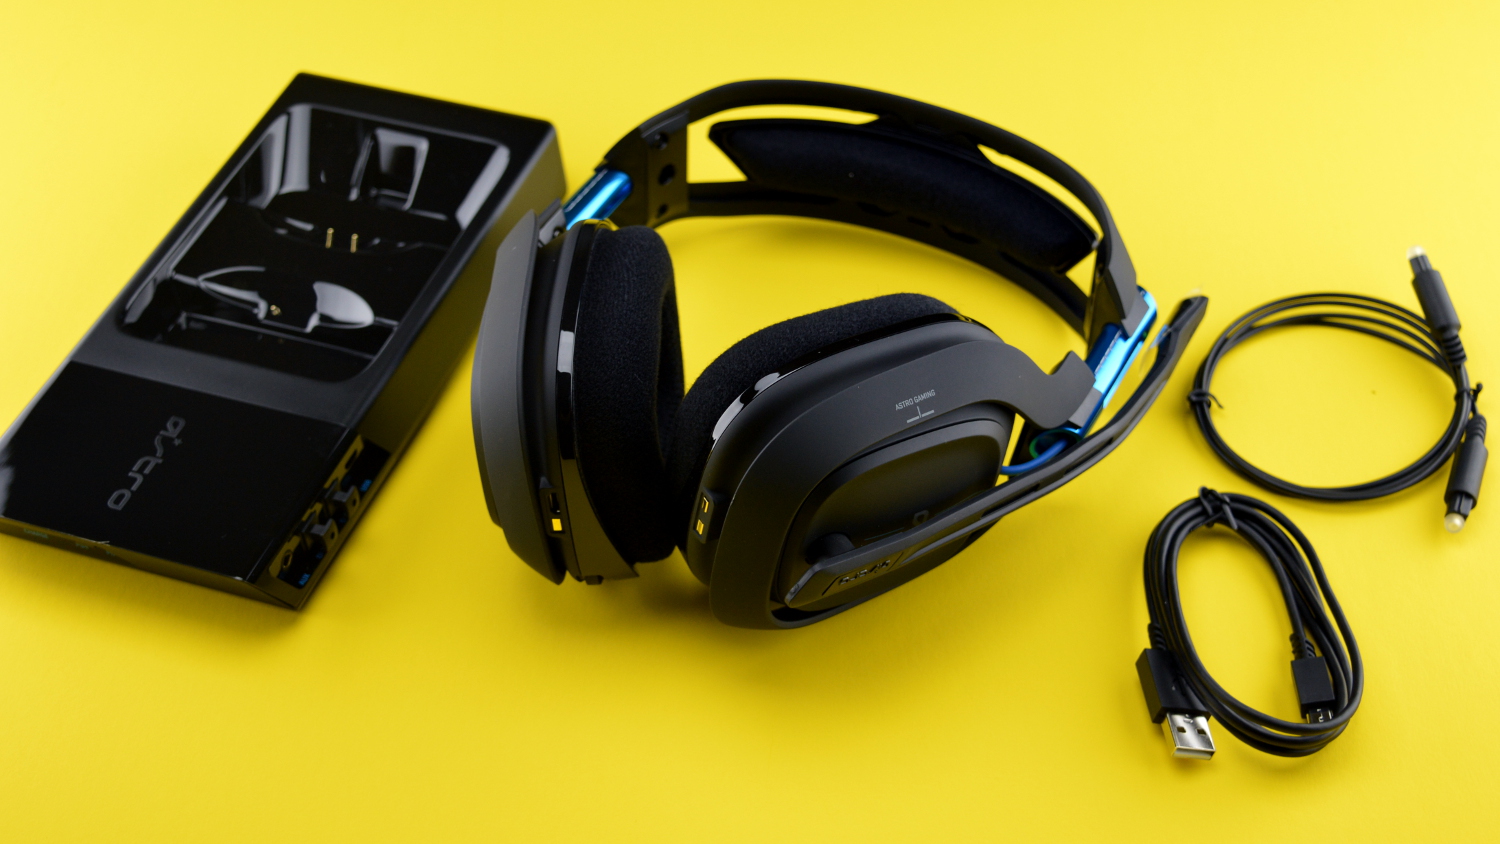 Astro A50 (2021) Wireless Xbox and PC headset review: All roads